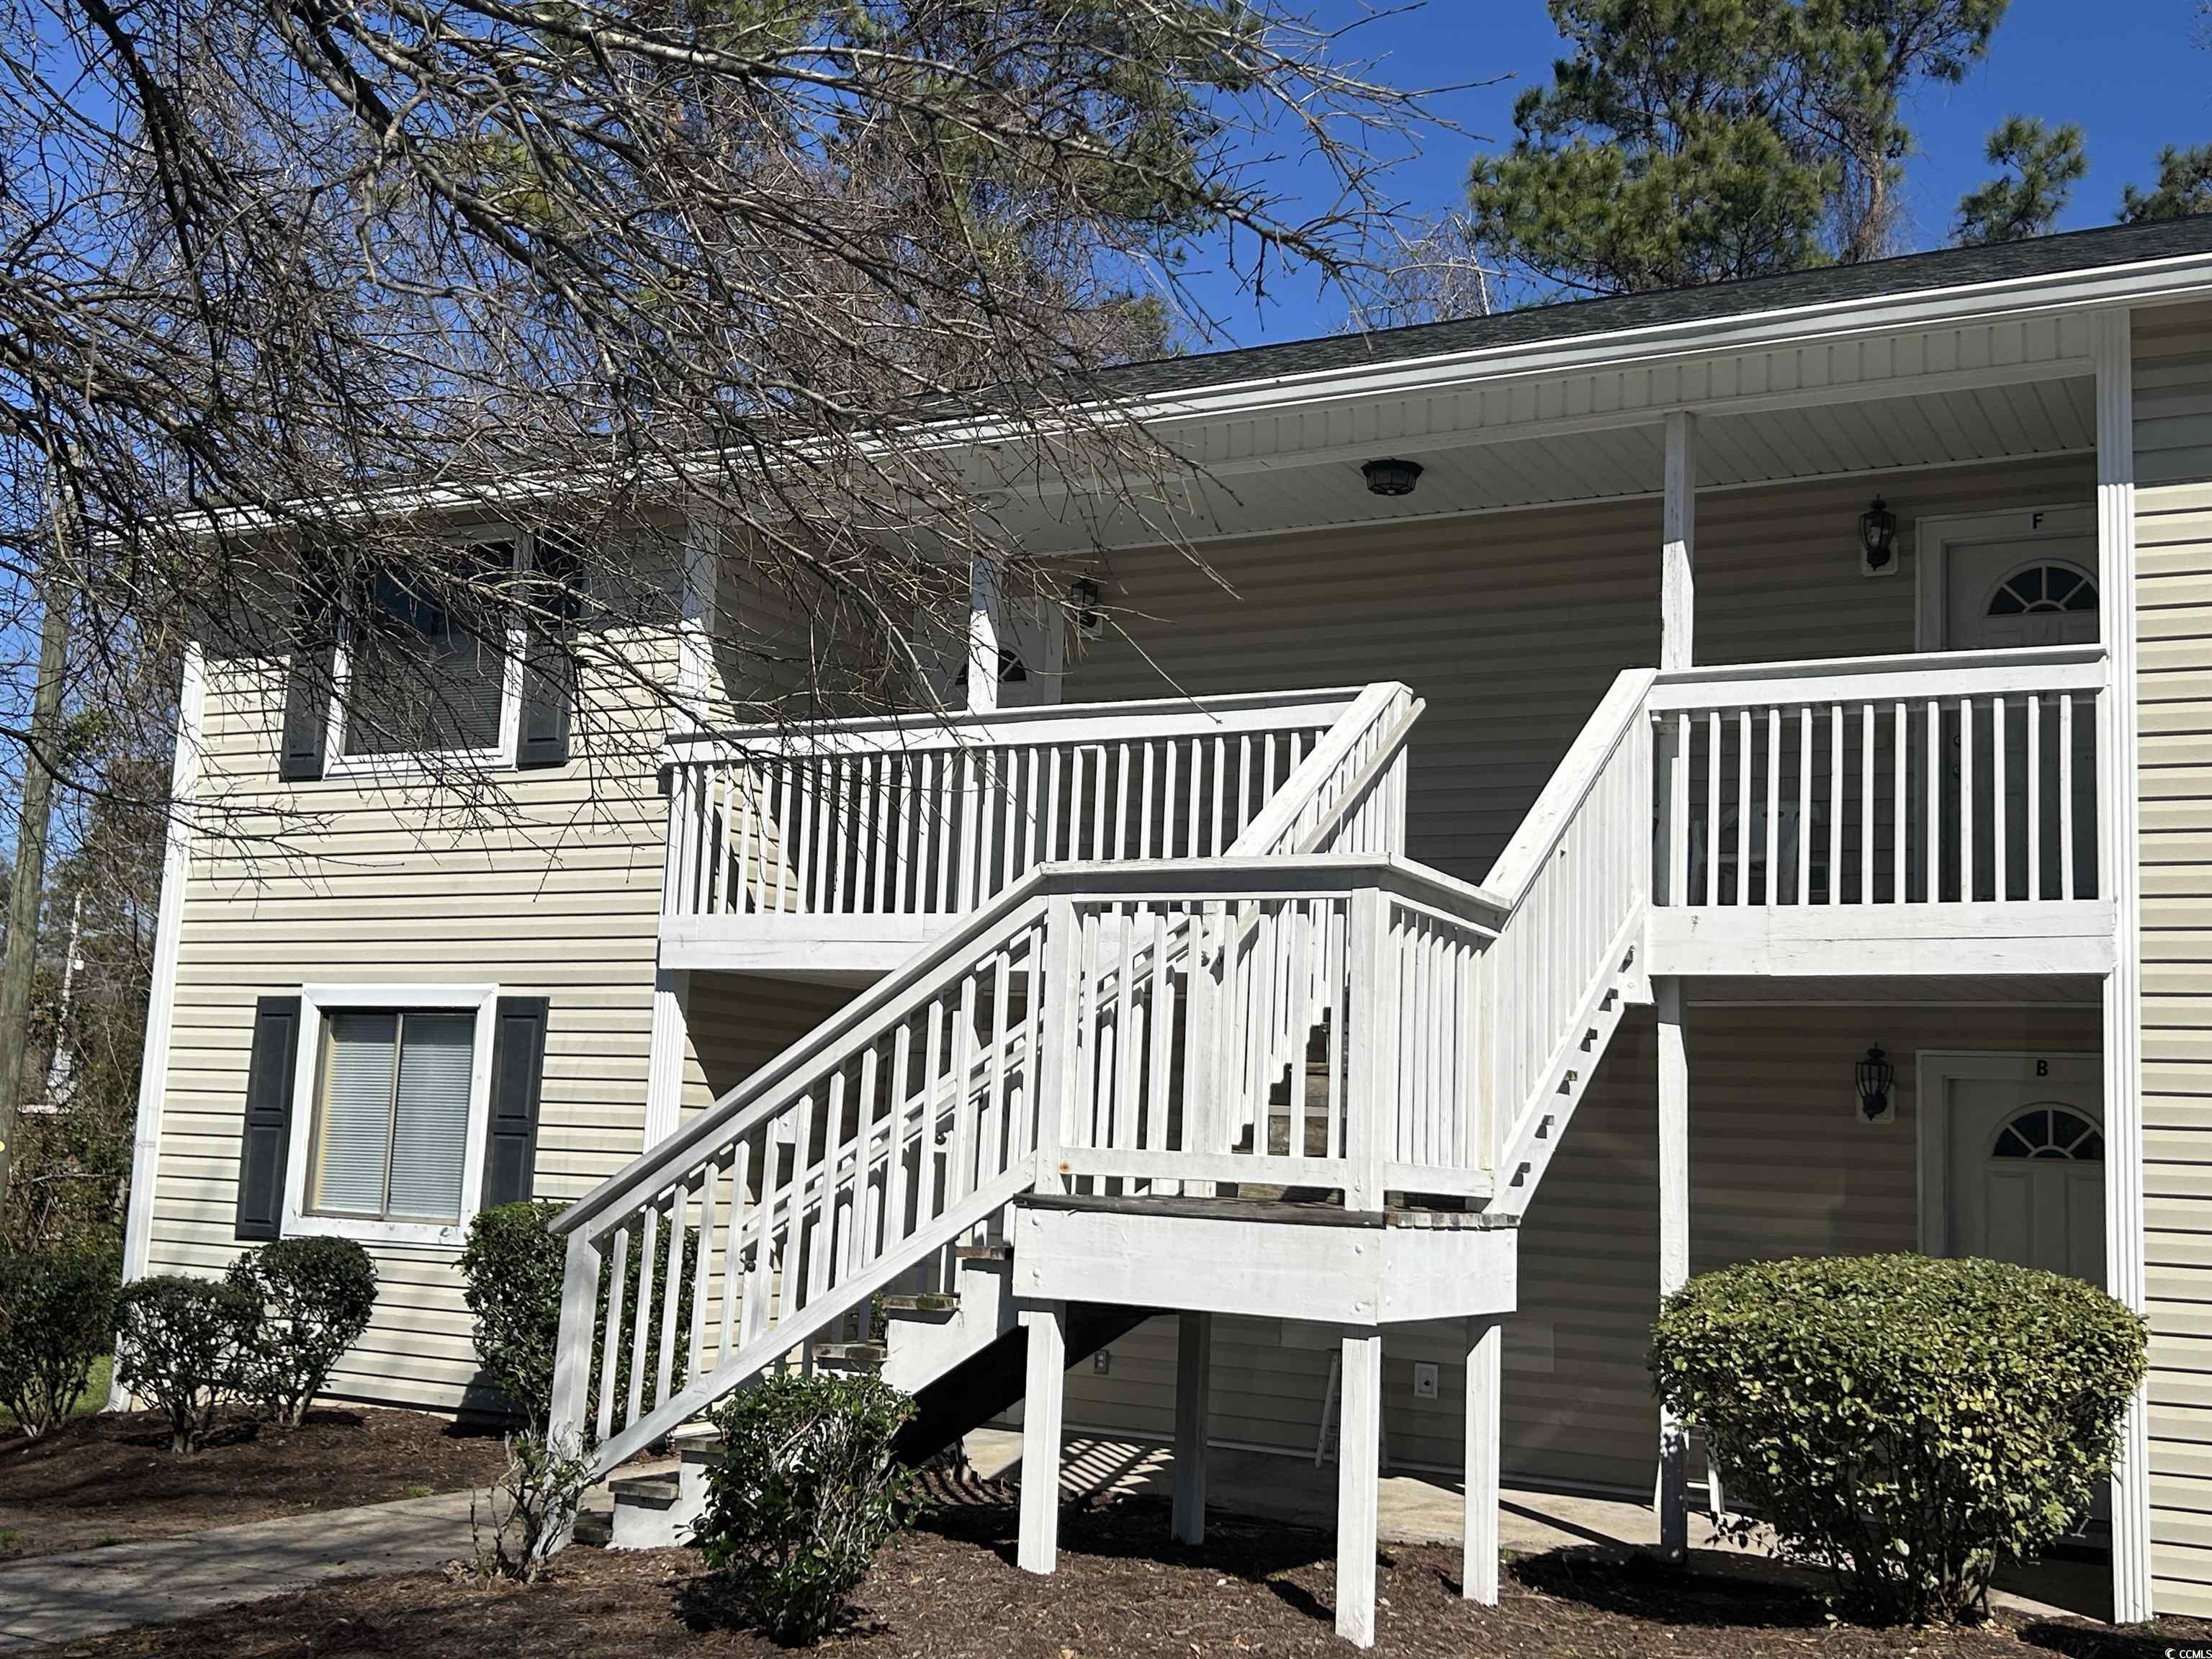 must see!  this 2 bedroom 2 bath is located within walking distance to coastal carolina university and the college stadium on hwy 544. second floor condo is an end unit! short drive to downtown conway or myrtle beach!  coastal villas provides an on-site laundromat for residents and a community pool!